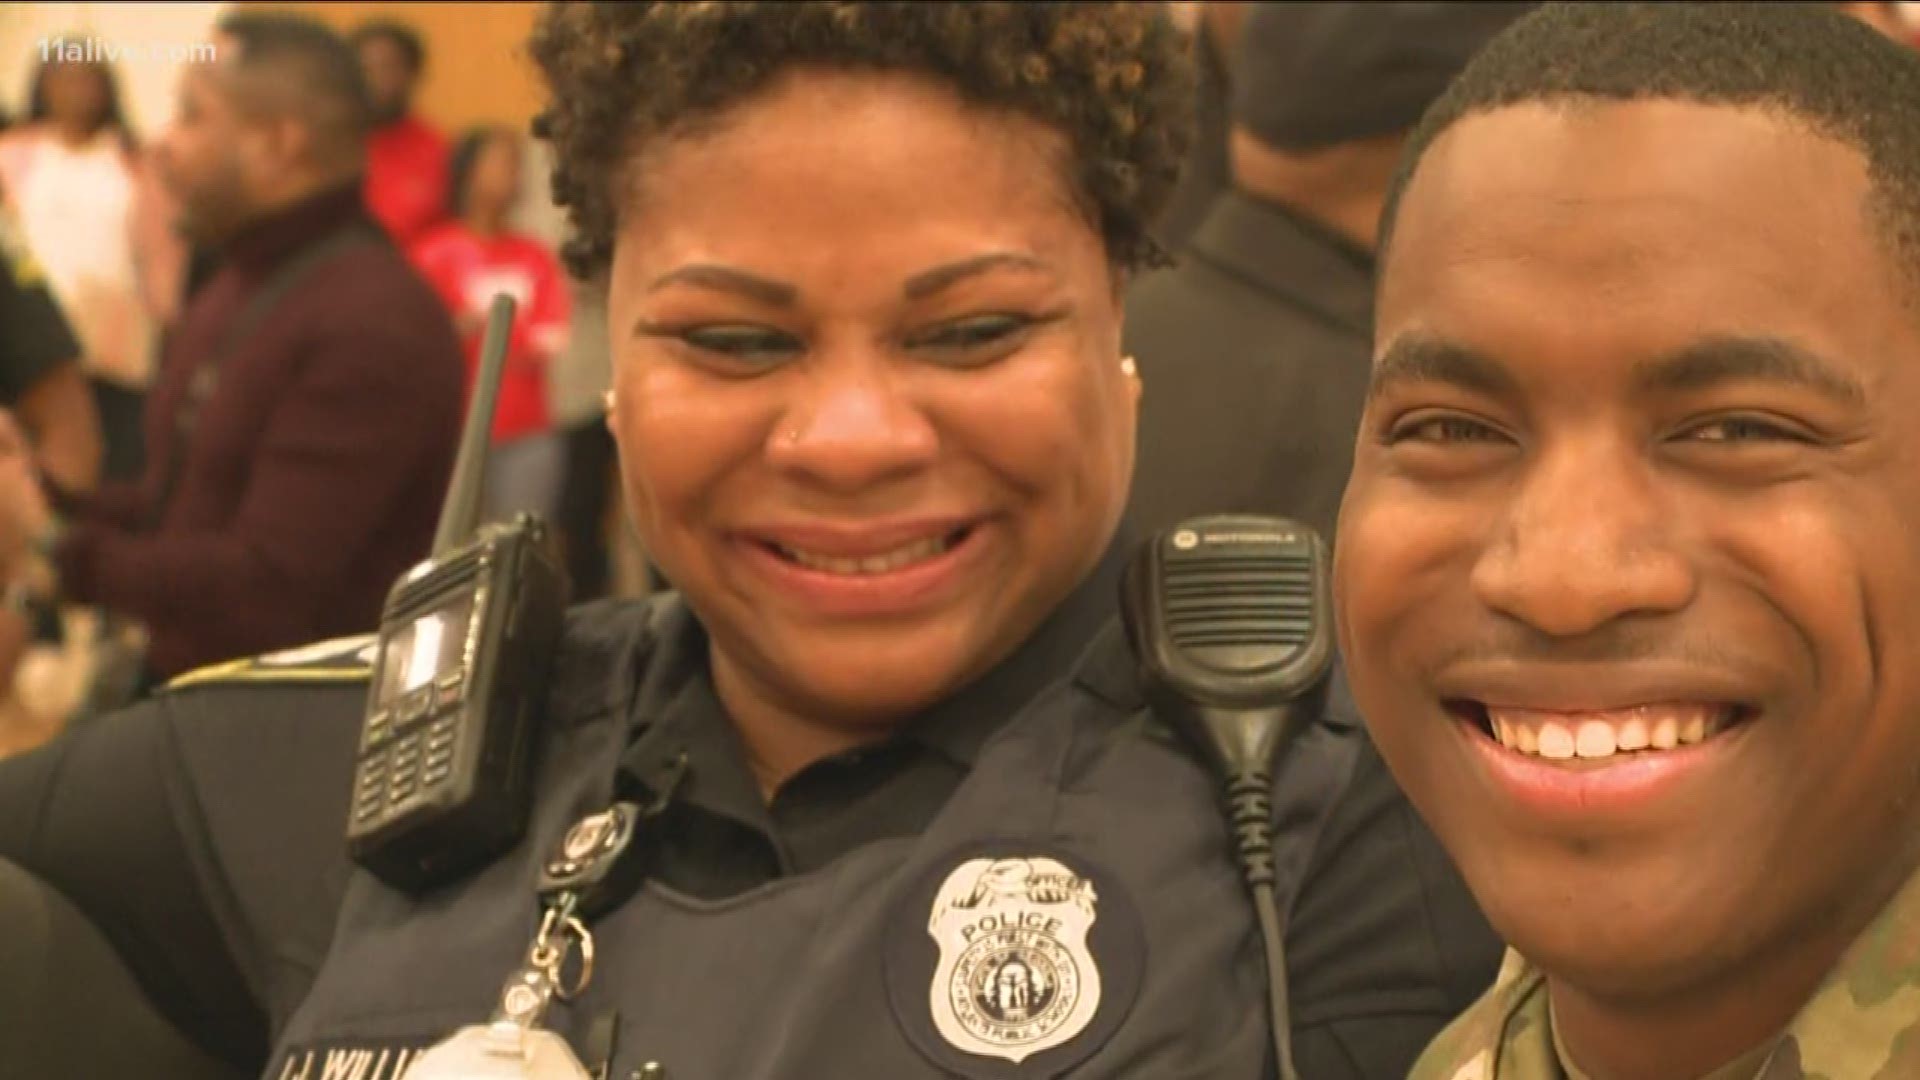 He hadn't seen his mom, who is a resource officer at Therrell High School, in two years